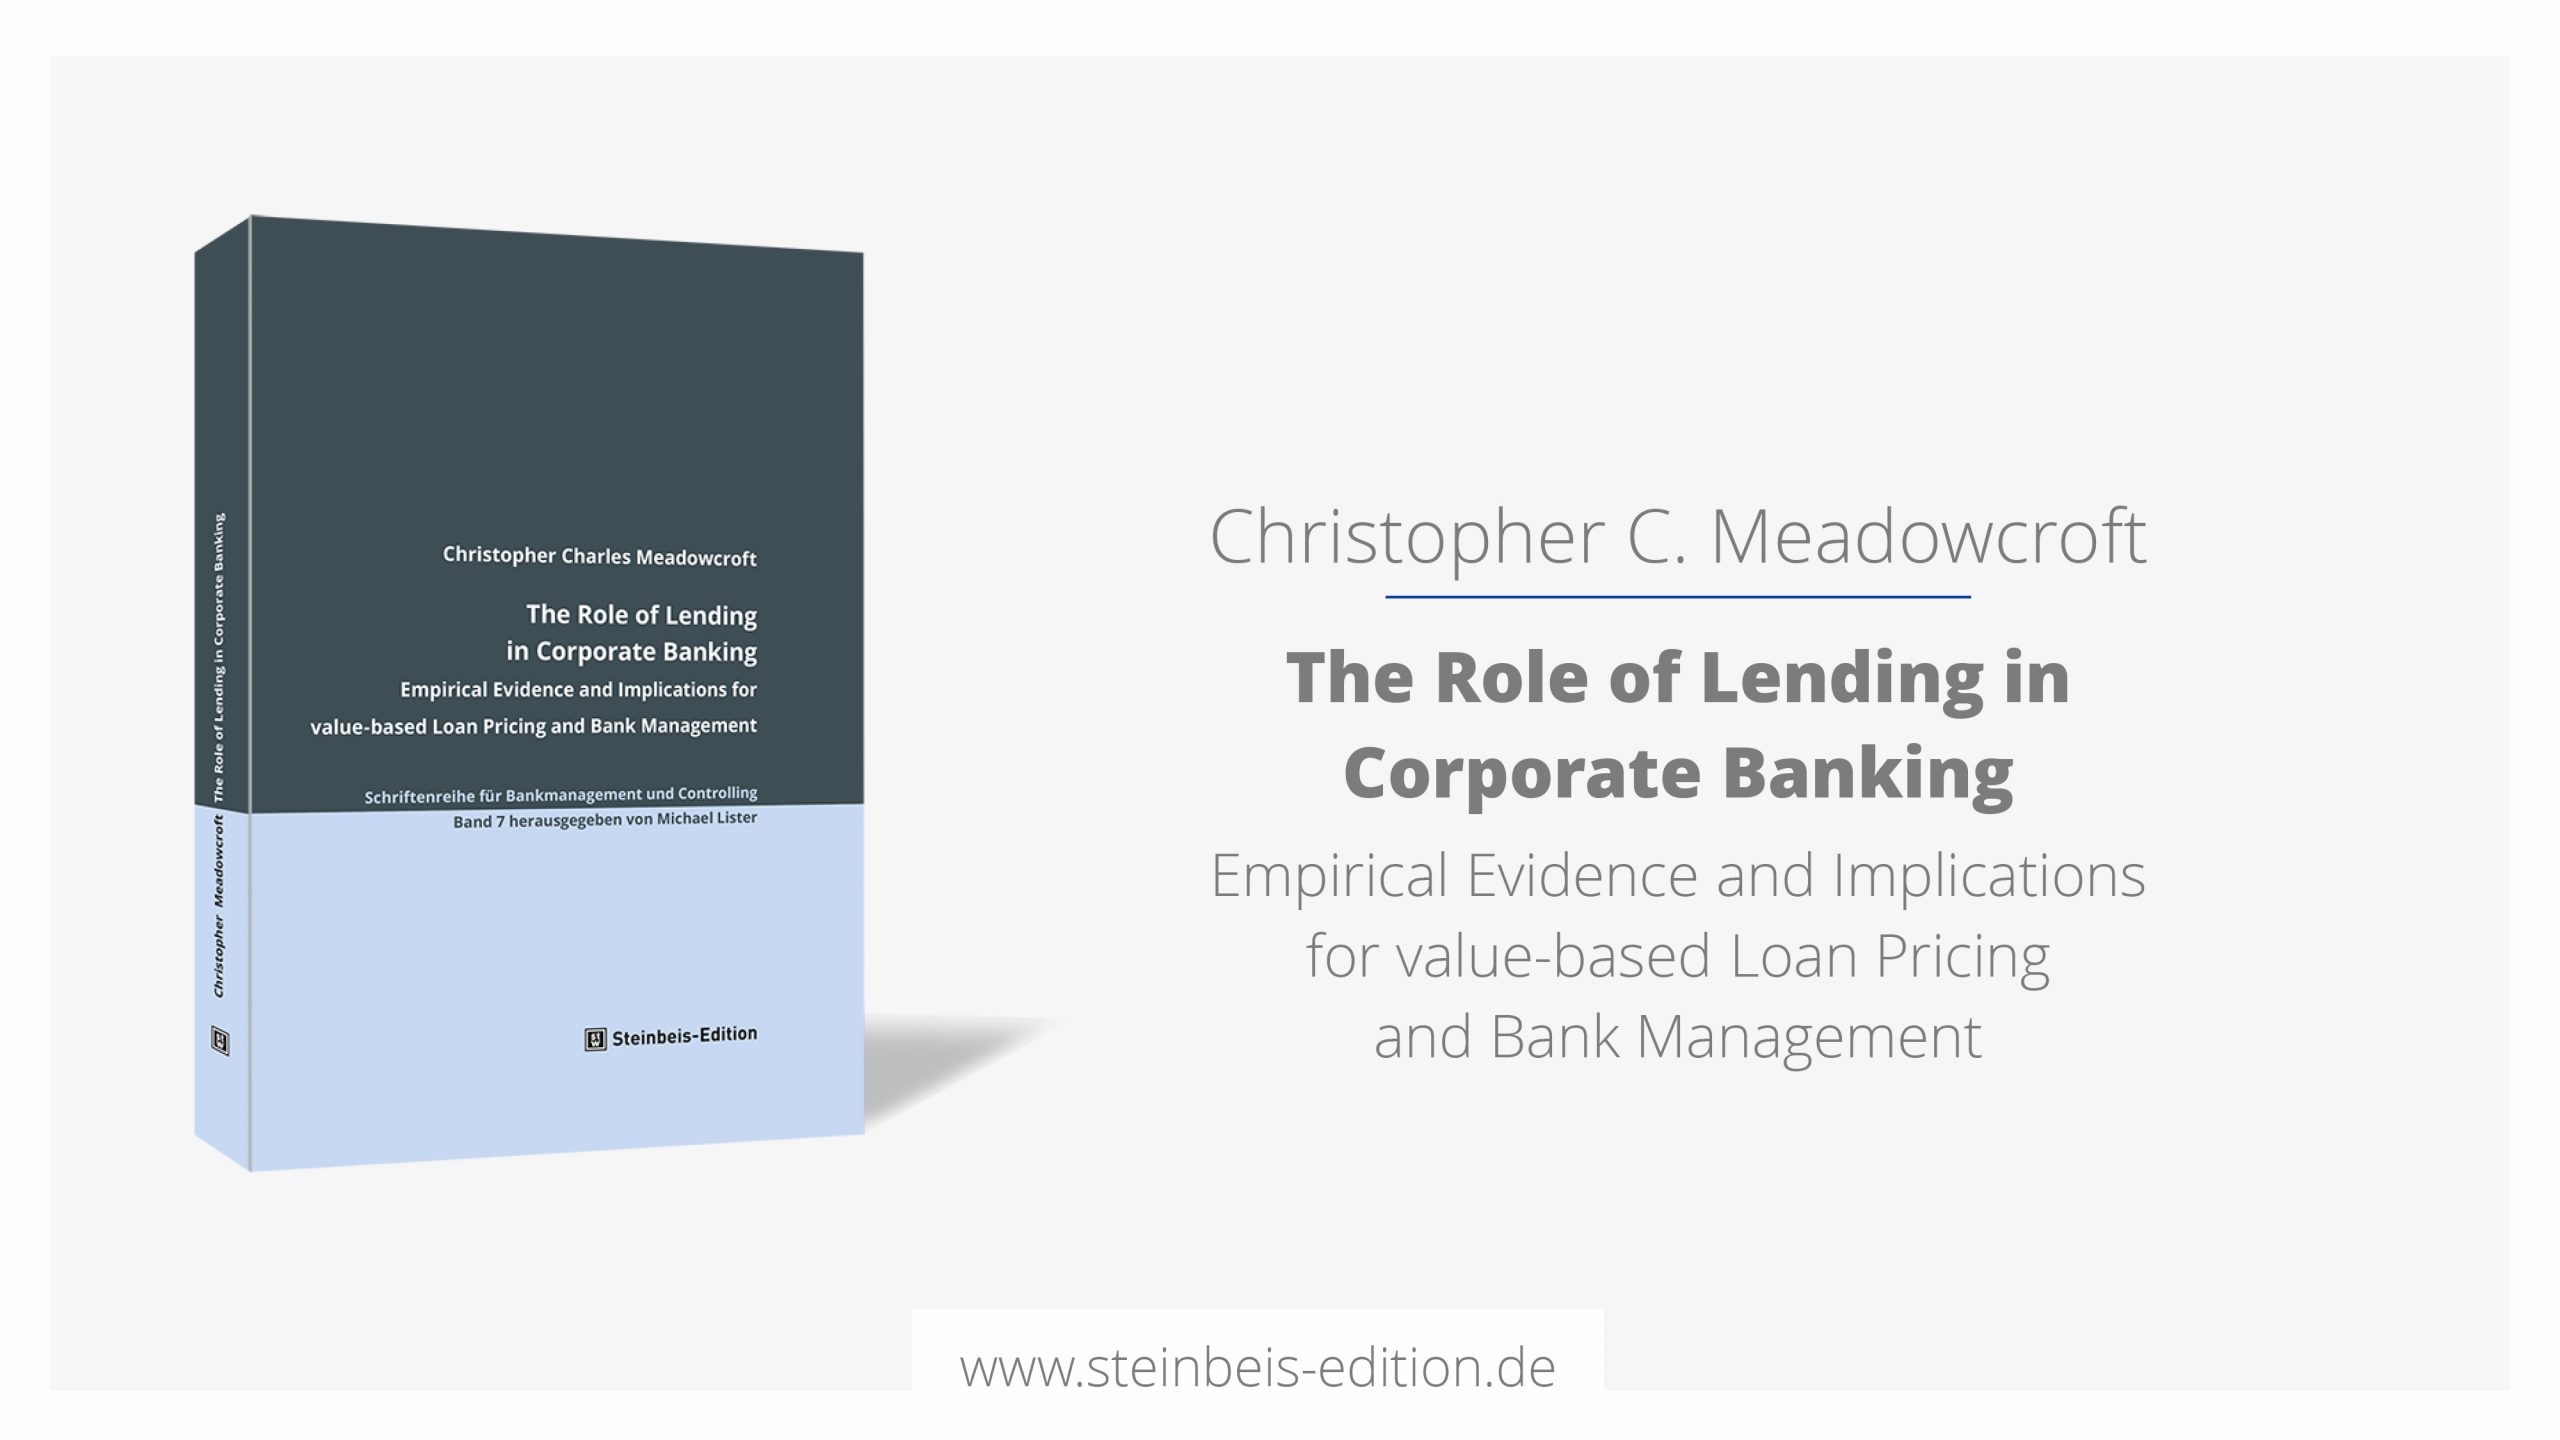 Dissertation “The Role of Lending in Corporate Banking”